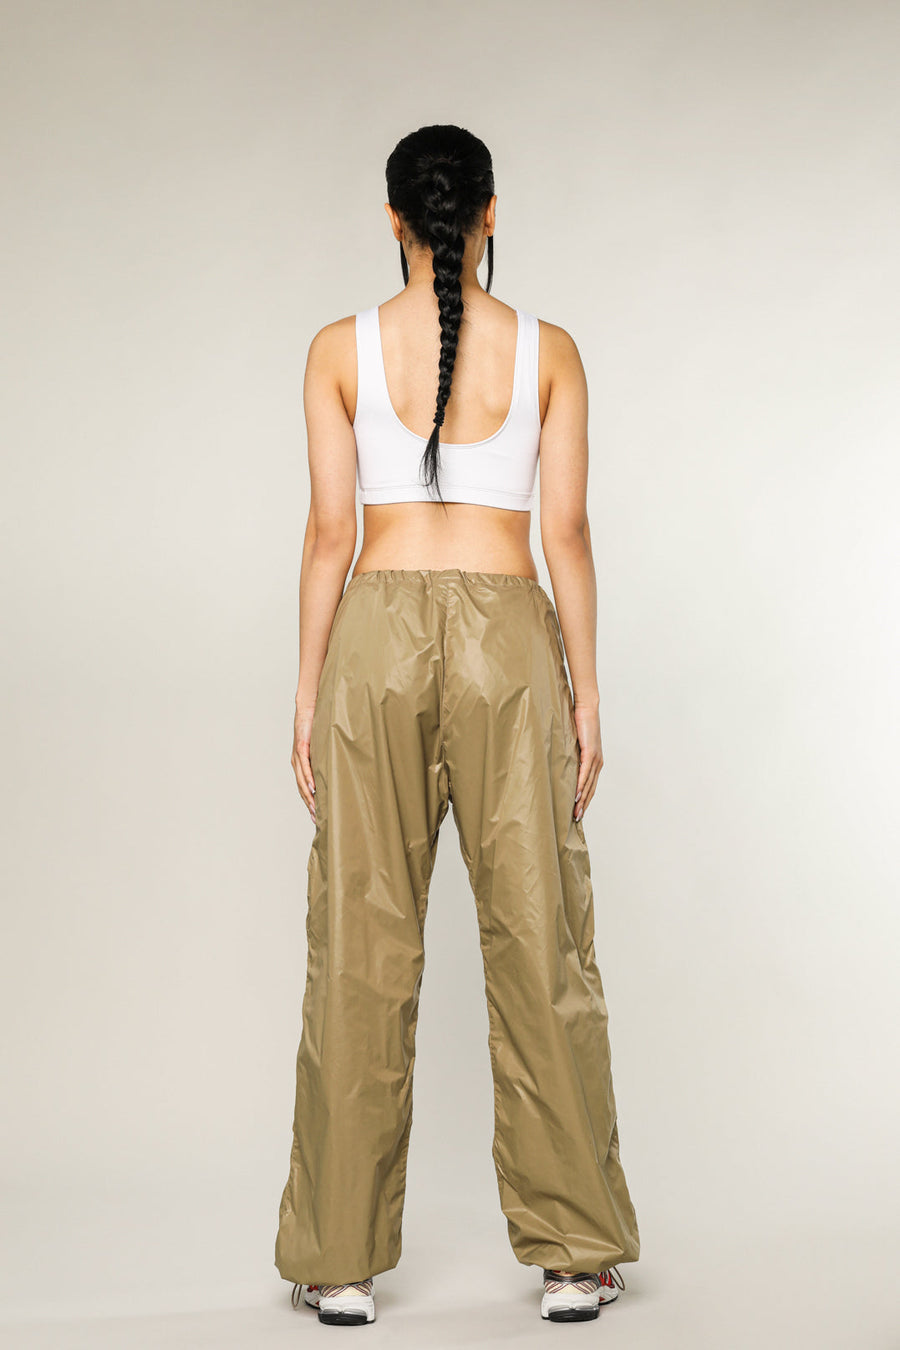 Deadstock Taupe Magma Pant - XS, S, M, L, XL, 2XL